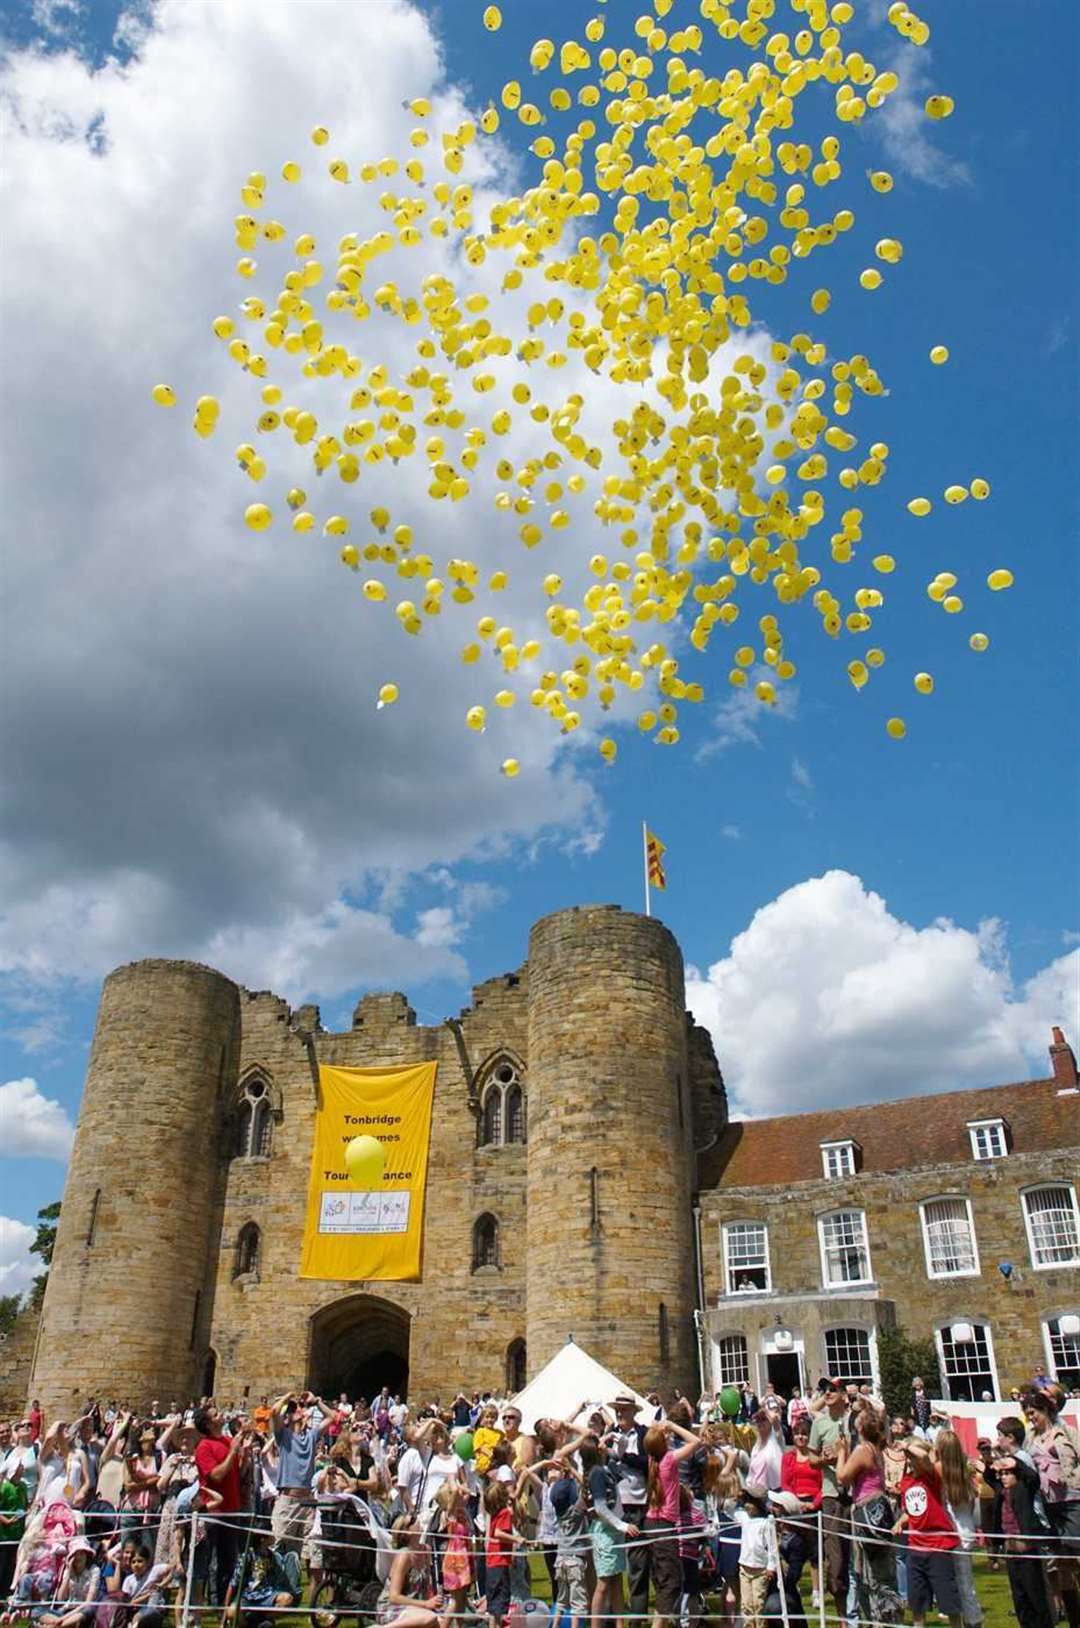 Dozens of yellow balloons were released into the blue sky. Pic; Linda Moreau